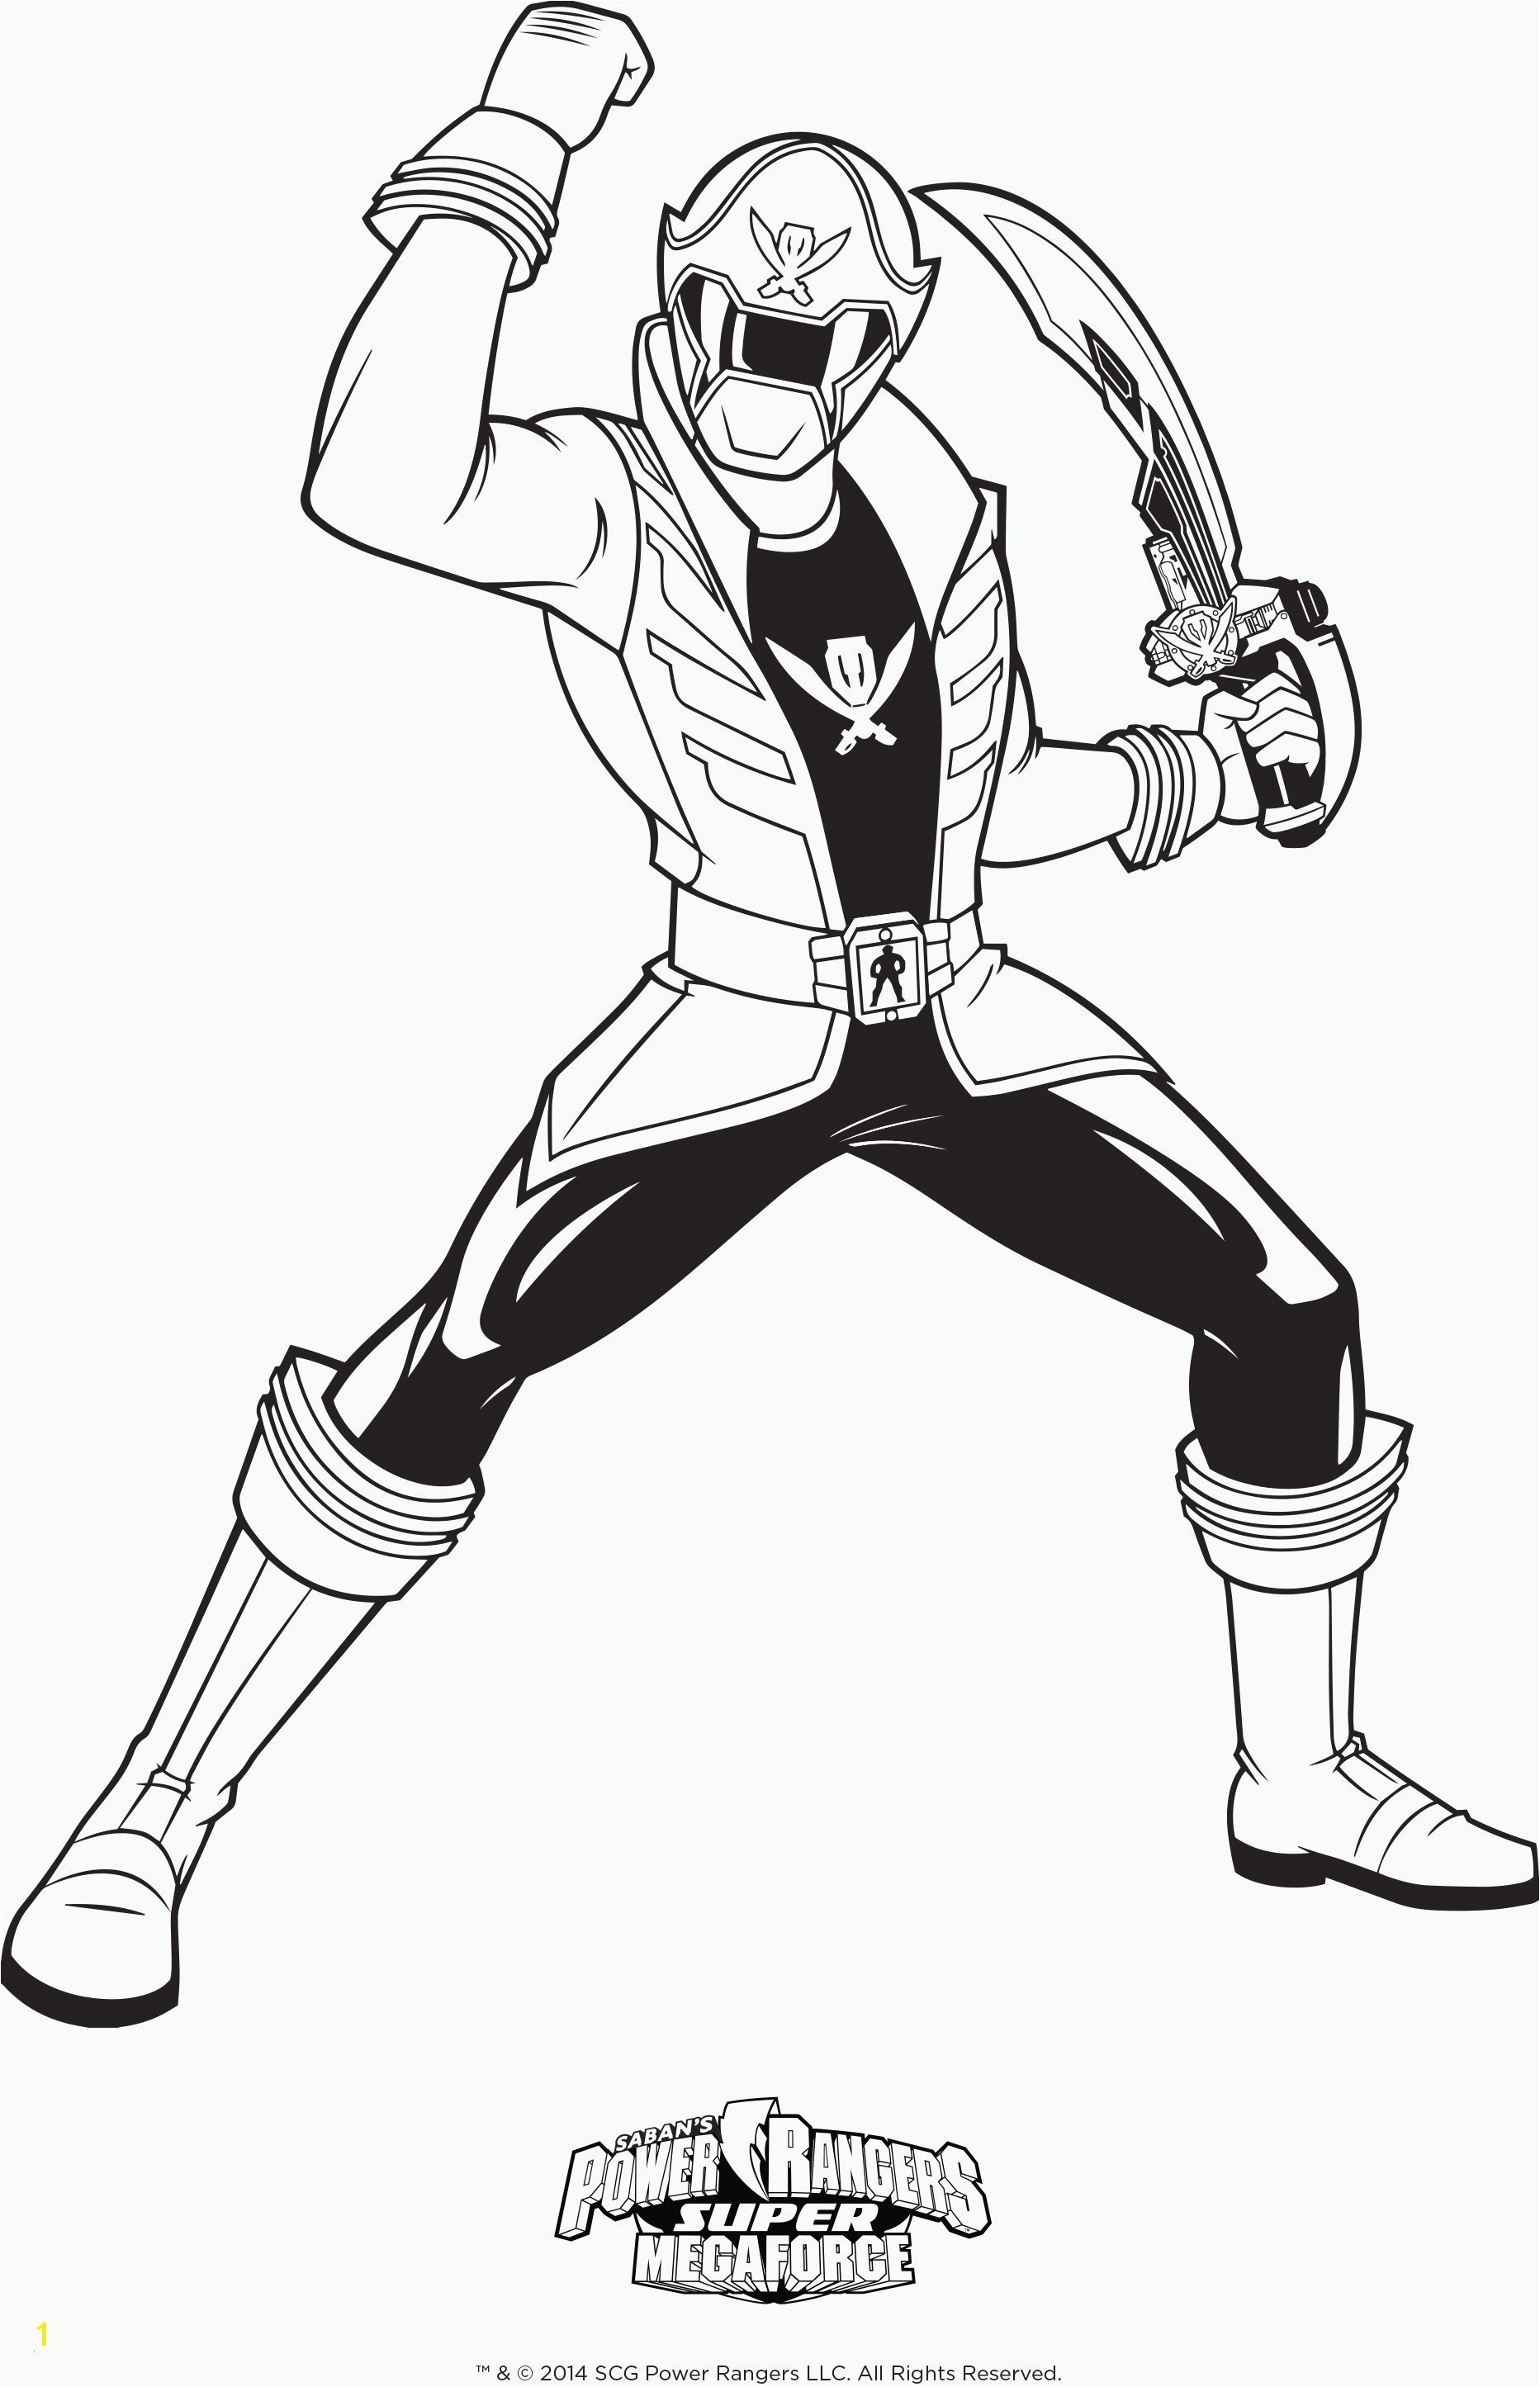 Green Power Ranger Coloring Pages Green Power Ranger Coloring Page Unique Power Rangers Coloring Pages